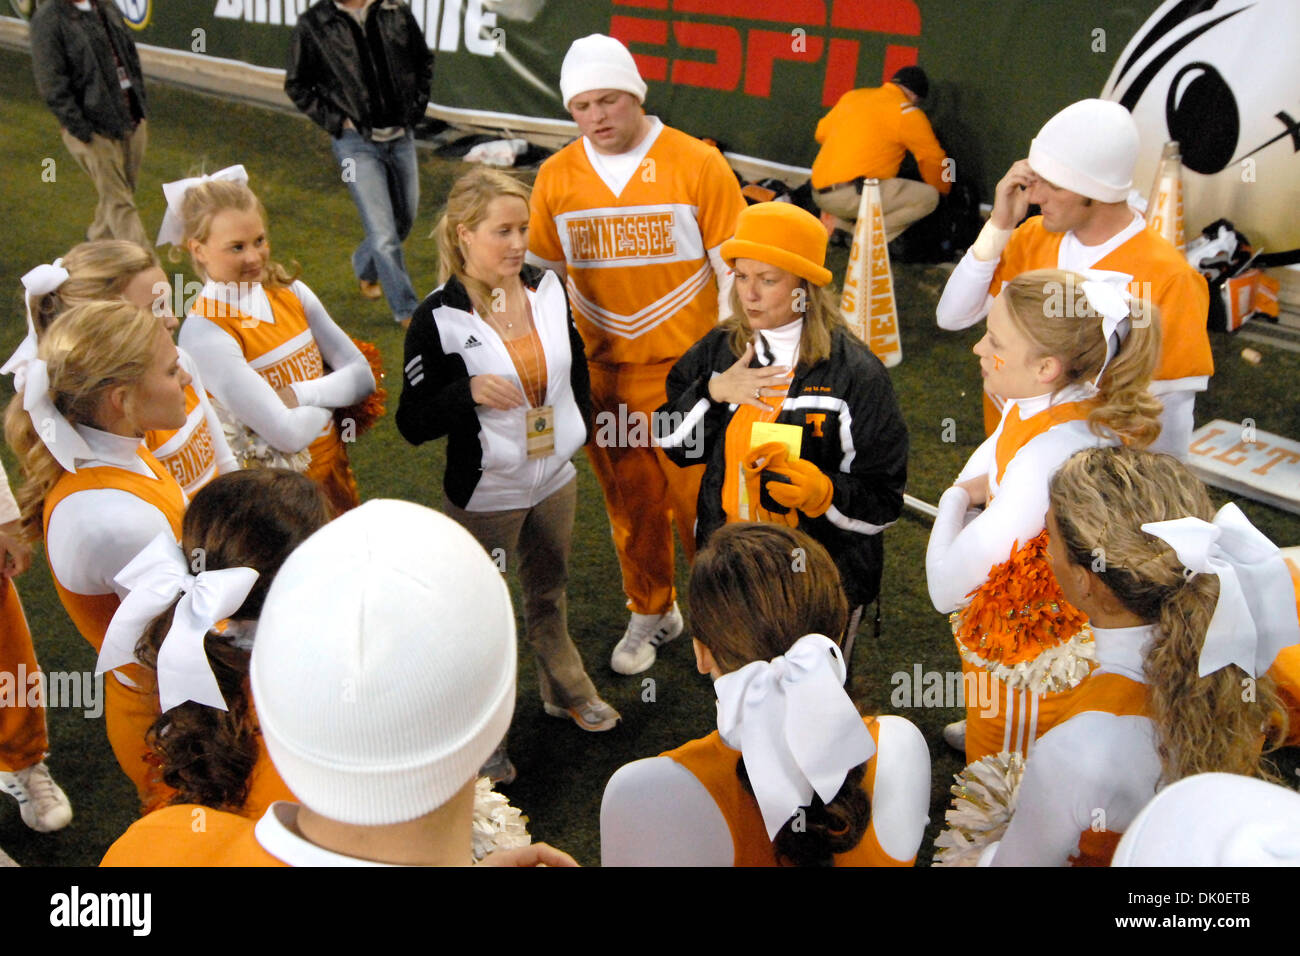 Dec. 30, 2010 - Nashville, Tennessee, United States of America - The Tennessee cheerleaders get ready for the game at the Franklin American Mortgage Music City Bowl at LP Field in Nashville, Tennessee. The Tar Heels defeated the Volunteers 30 to 27 in overtime. (Credit Image: © Bryan Hulse/Southcreek Global/ZUMAPRESS.com) Stock Photo